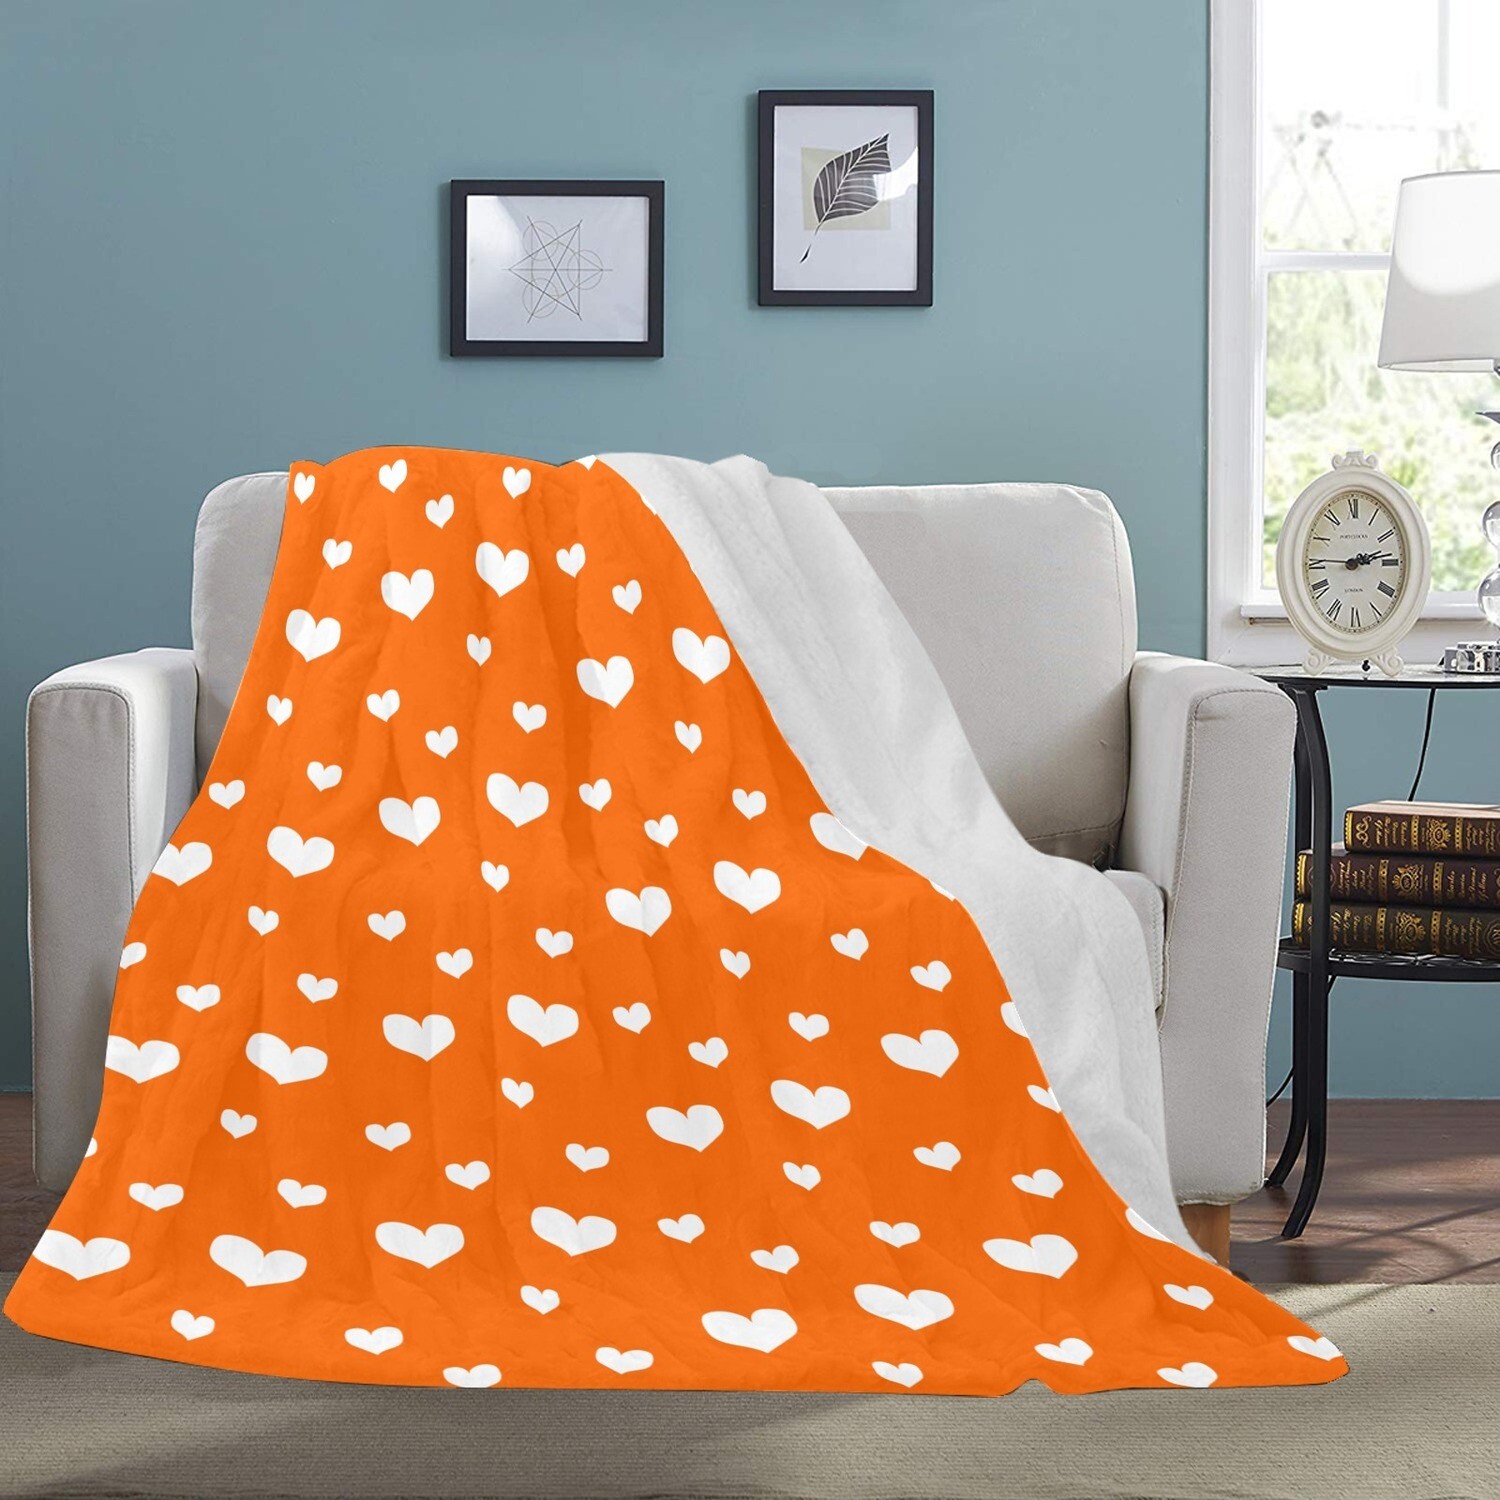 🤴🏽👸🏽💕Large Ultra-Soft Micro Fleece Blanket Valentine white hearts on orange, gift, gift for her, gift for him, gift for them, 70"x80"